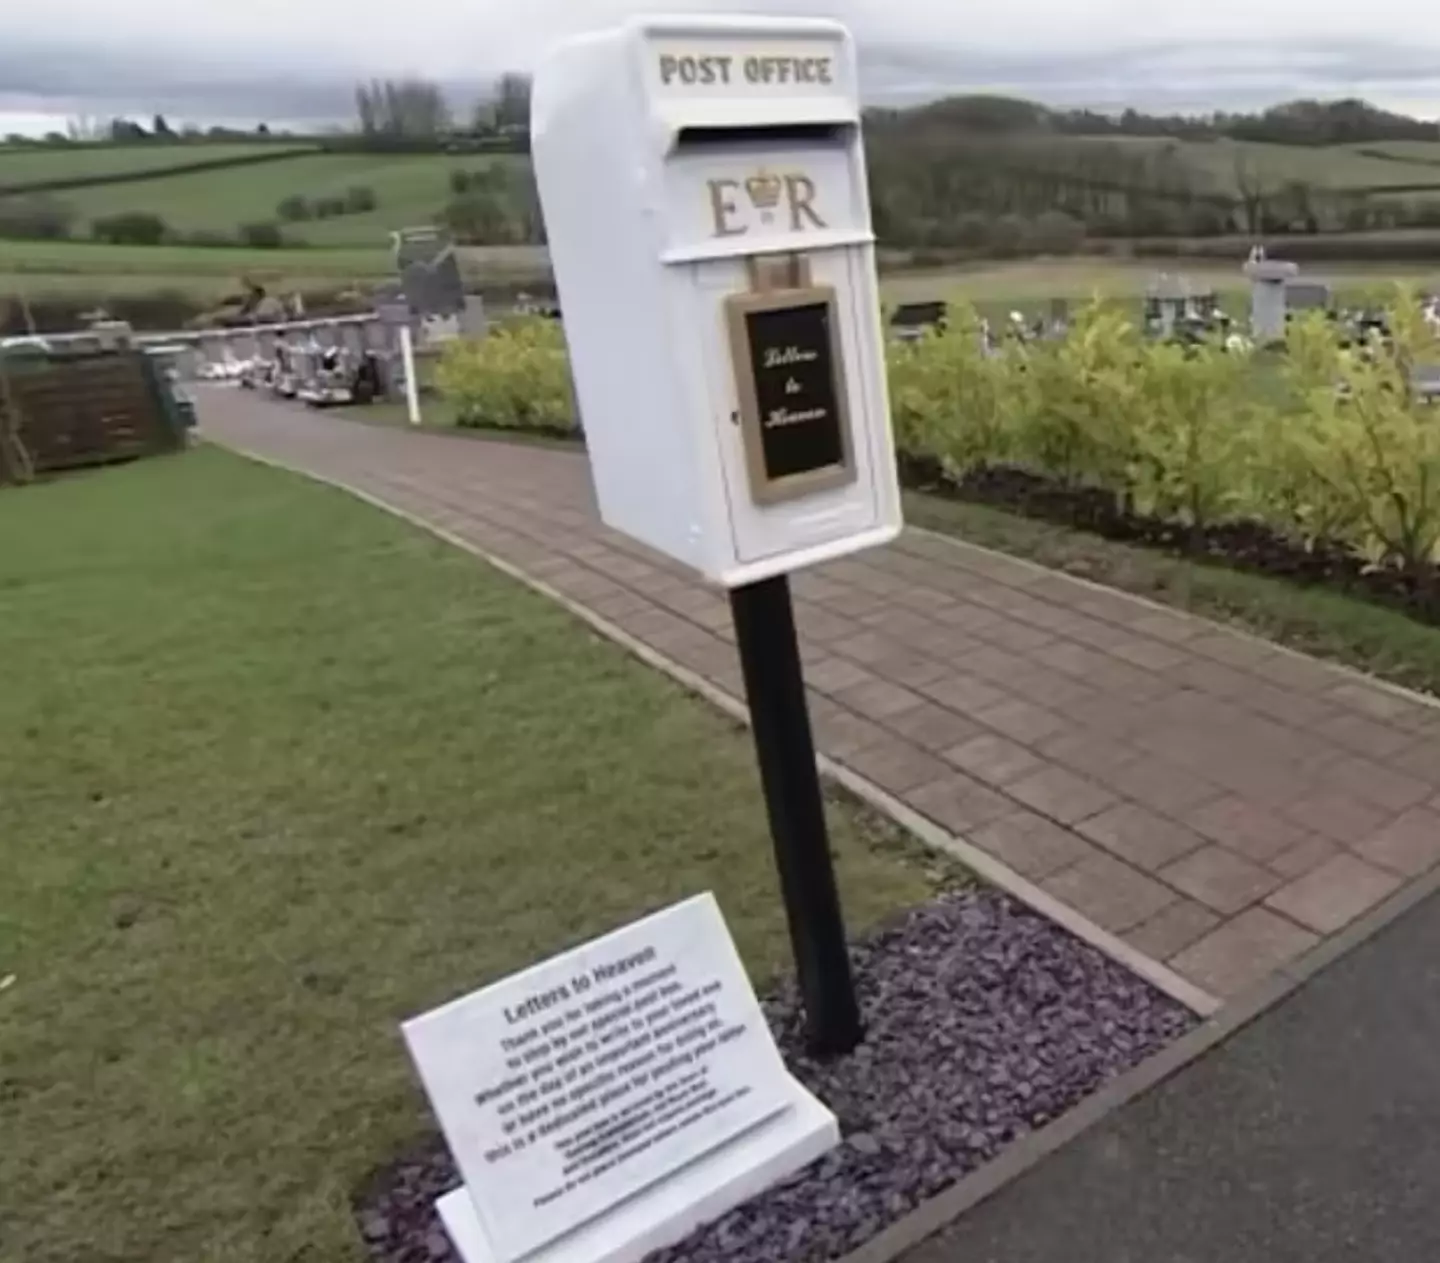 The Postbox to Heaven is set up at Gedling Crematorium in Nottinghamshire.